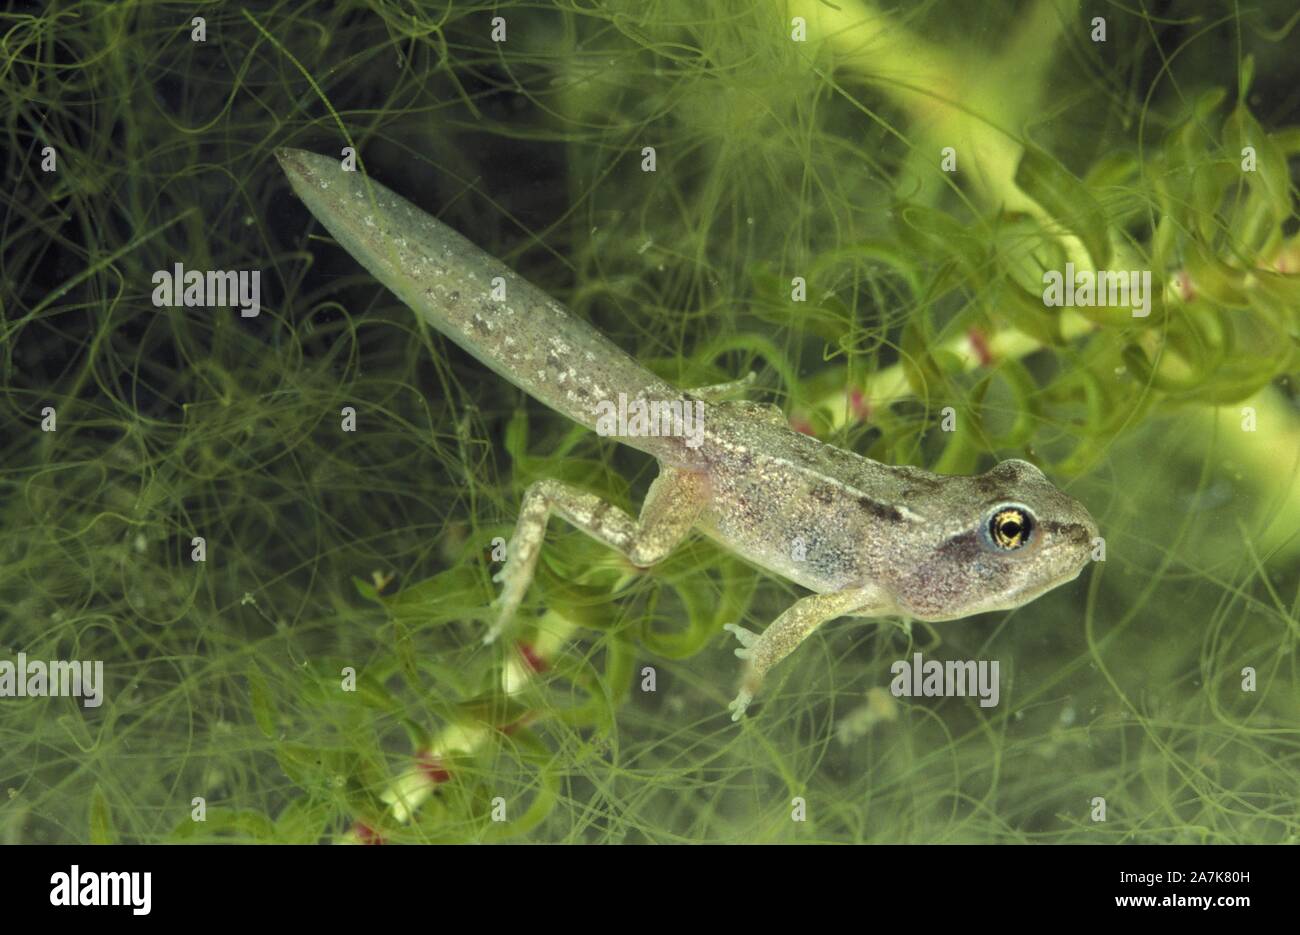 Common frog (Rana temporaria) almost a young frog (1 cm length) with four legs - the tadpole will still lose its tail to become frog - Underwater view Stock Photo